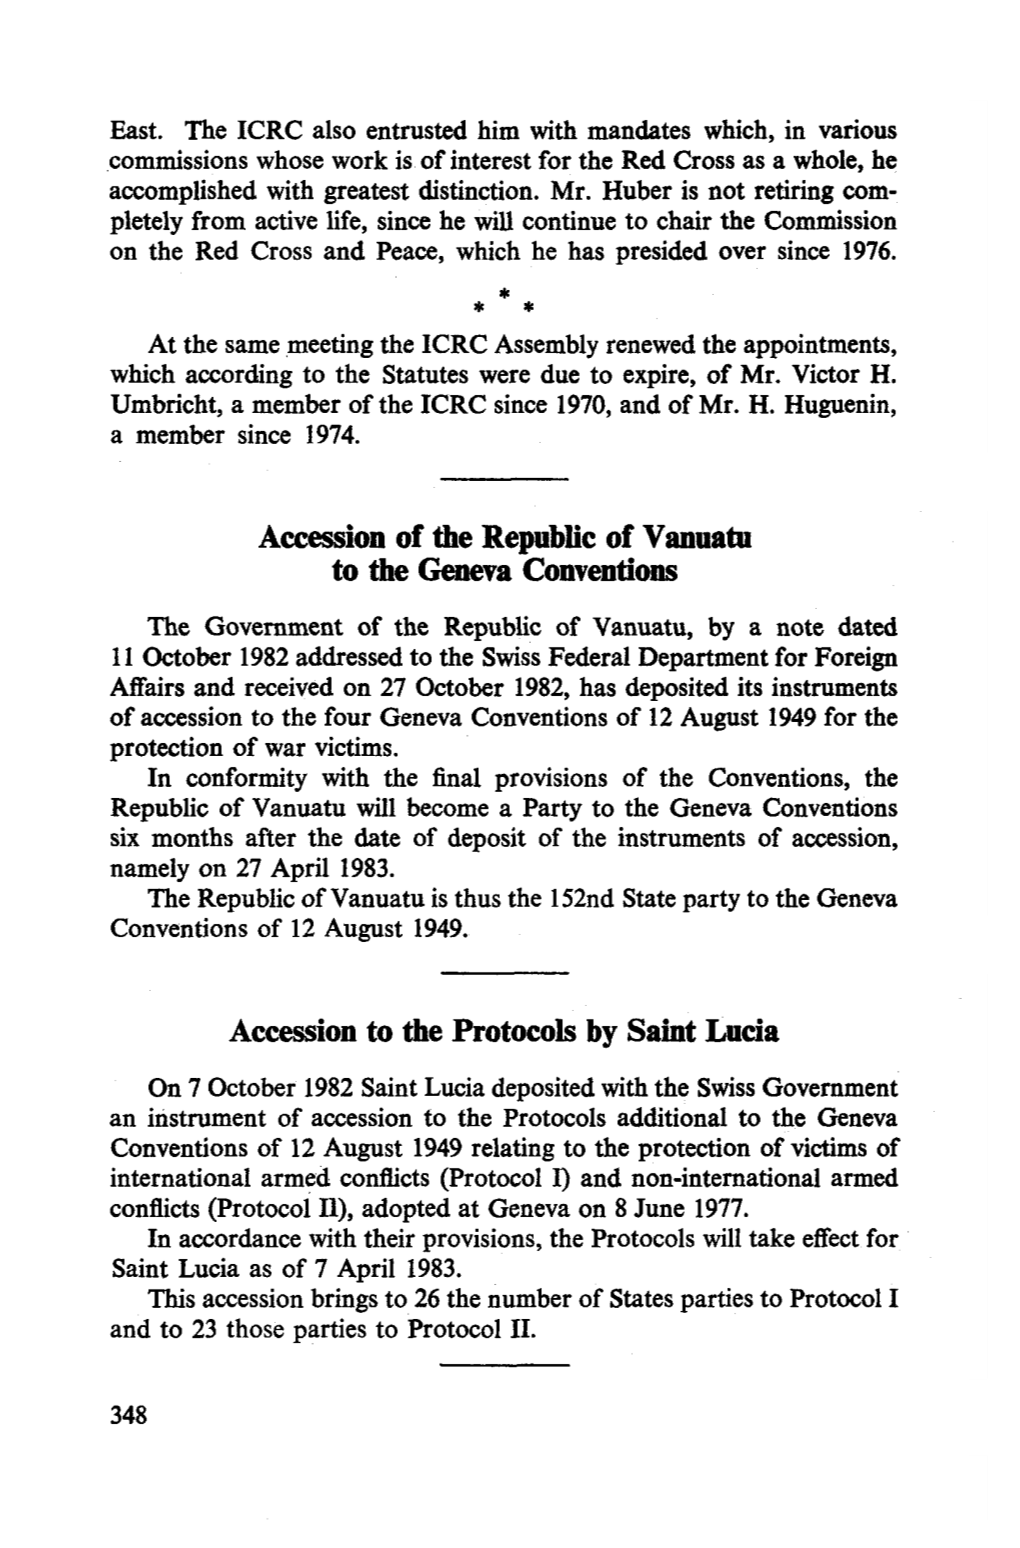 Accession of the Republic of Vanuatu to the Geneva Conventions Accession to the Protocols by Saint Lucia